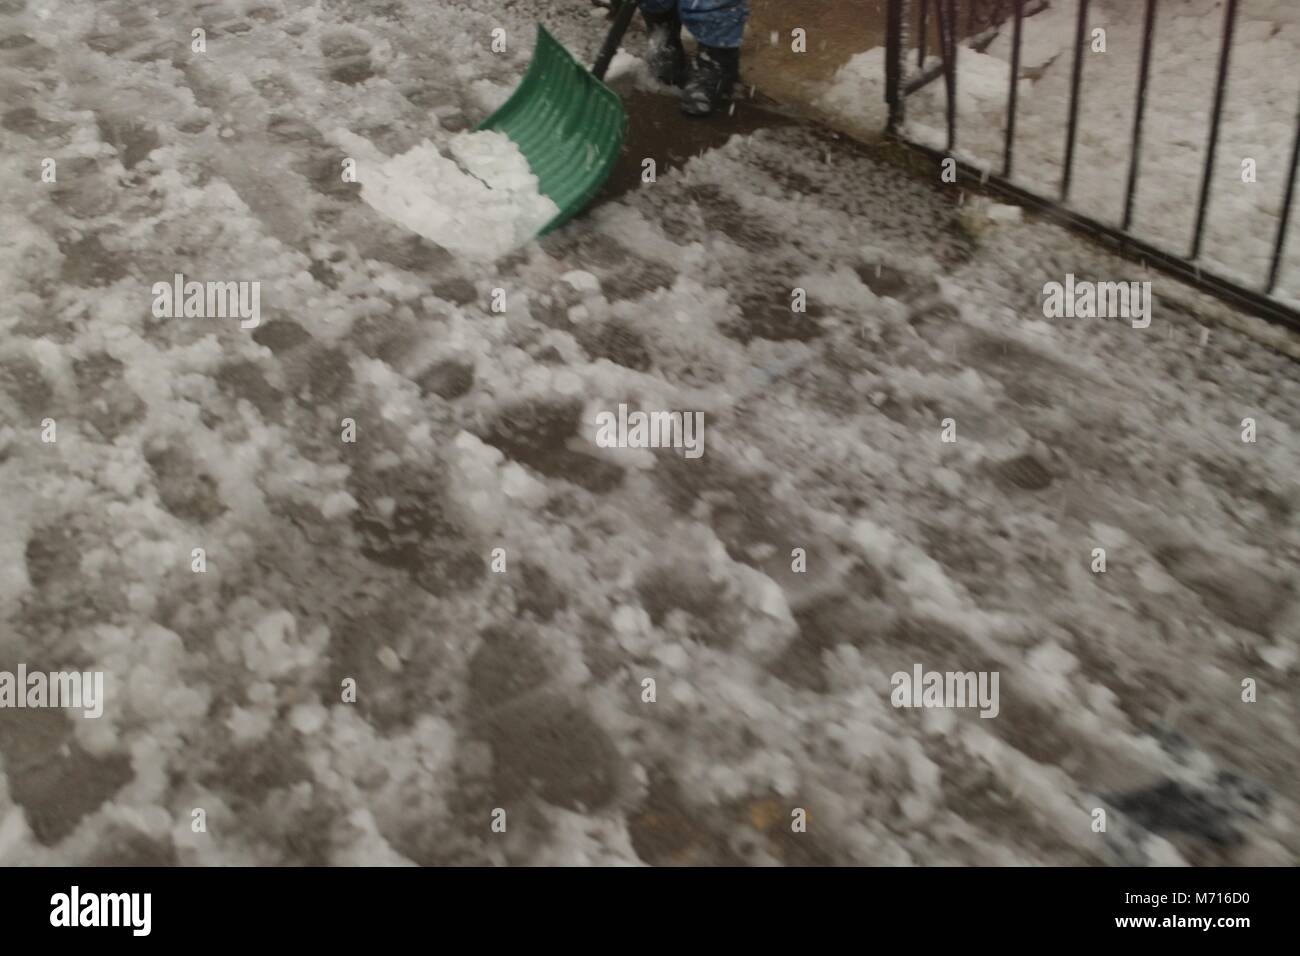 Shoveling a sidewalk covered in slushy snow during the Nor'easter of March 7th, 2018 in Brooklyn New York. Stock Photo